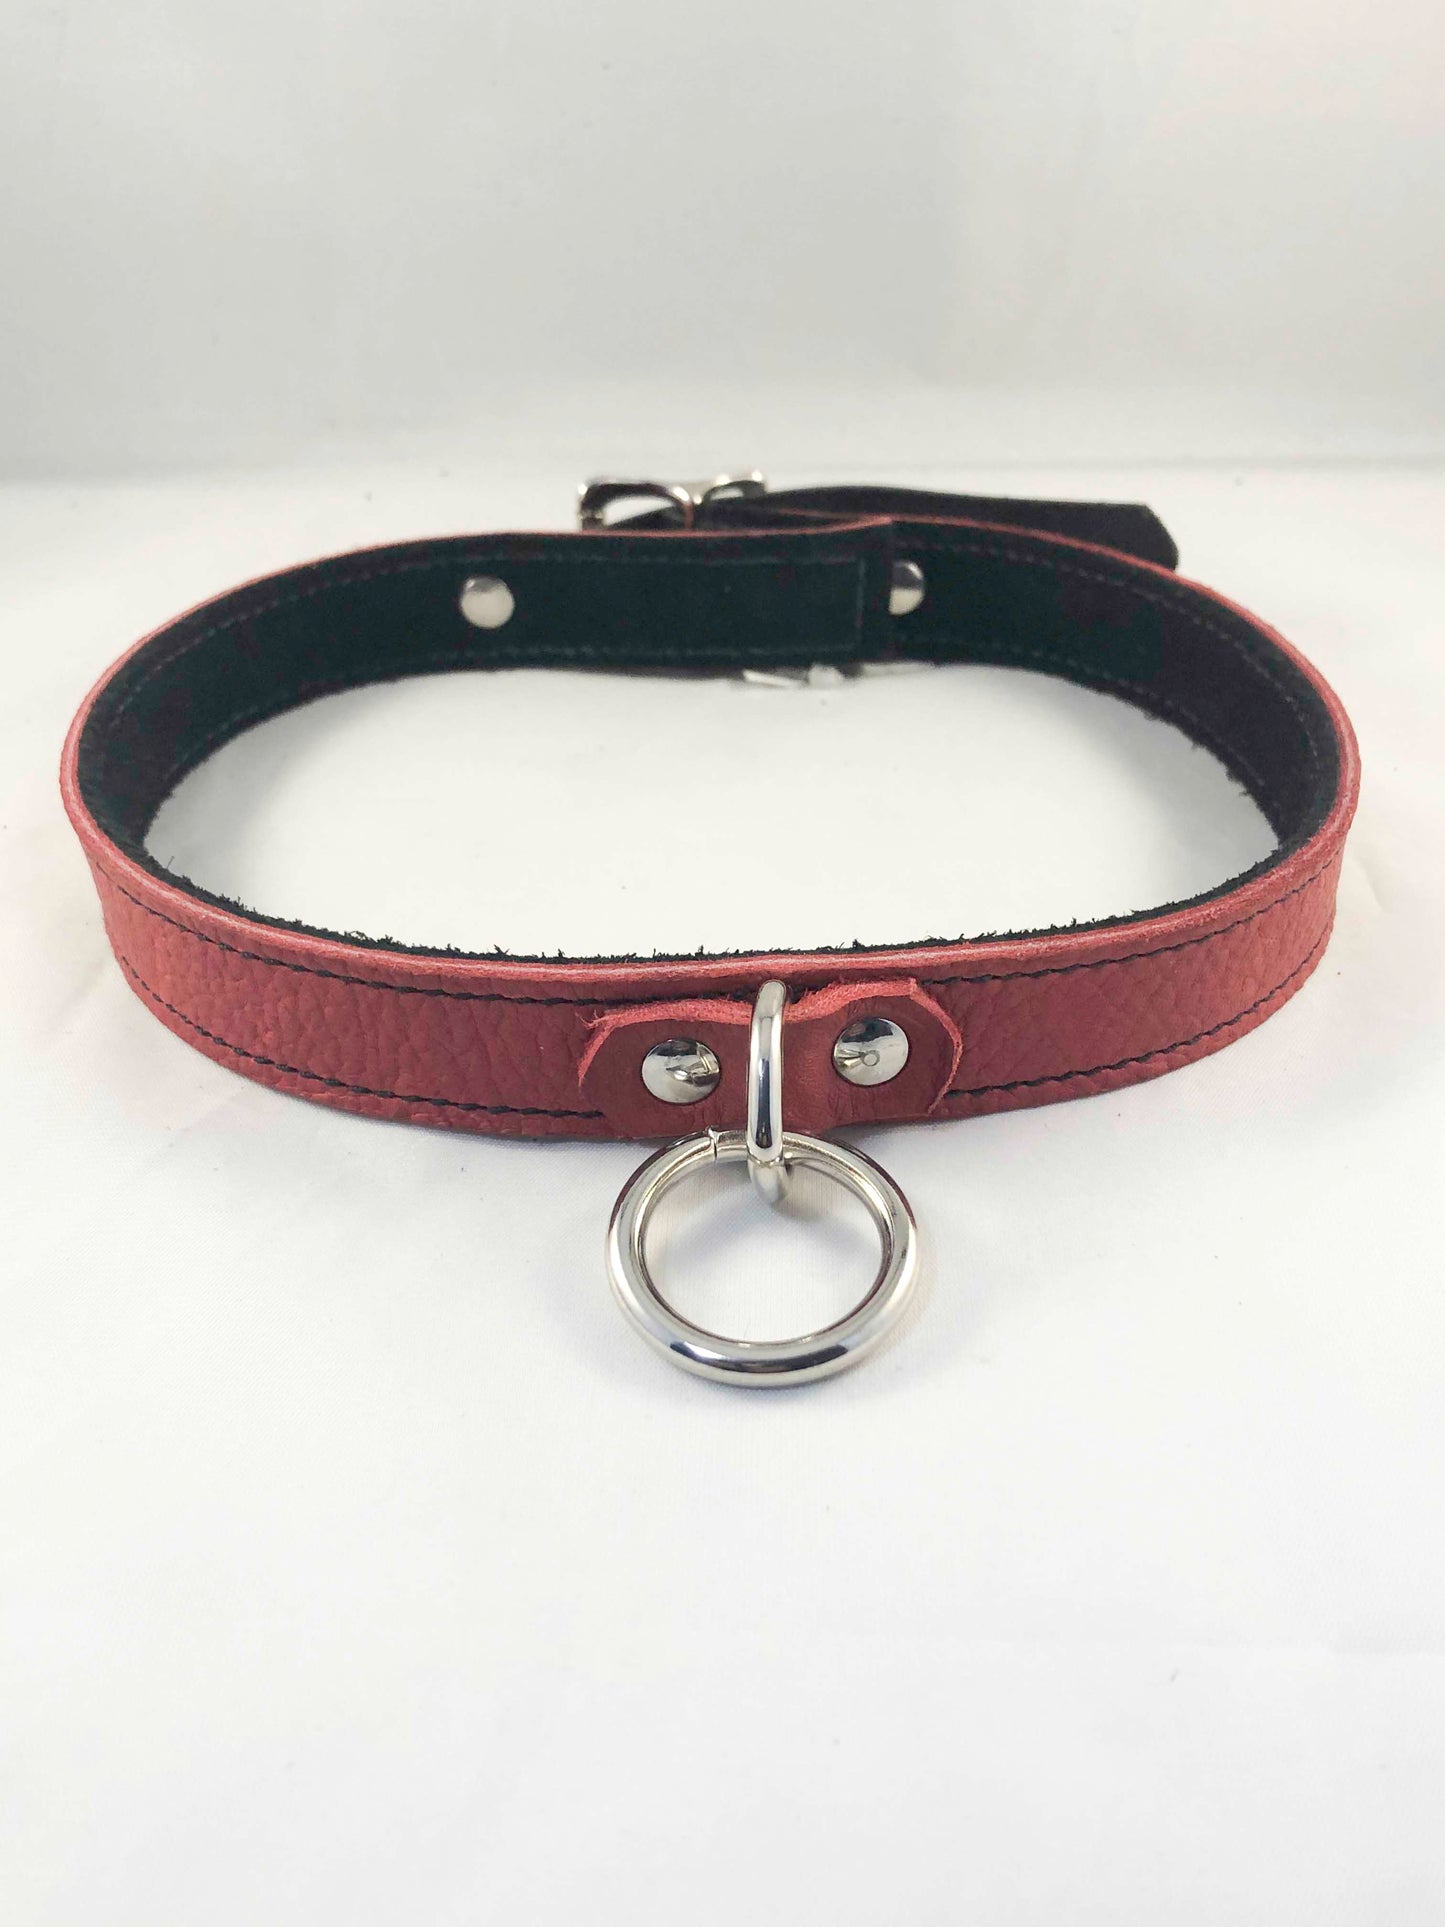 The front view of the red Basic Single Ring Collar.